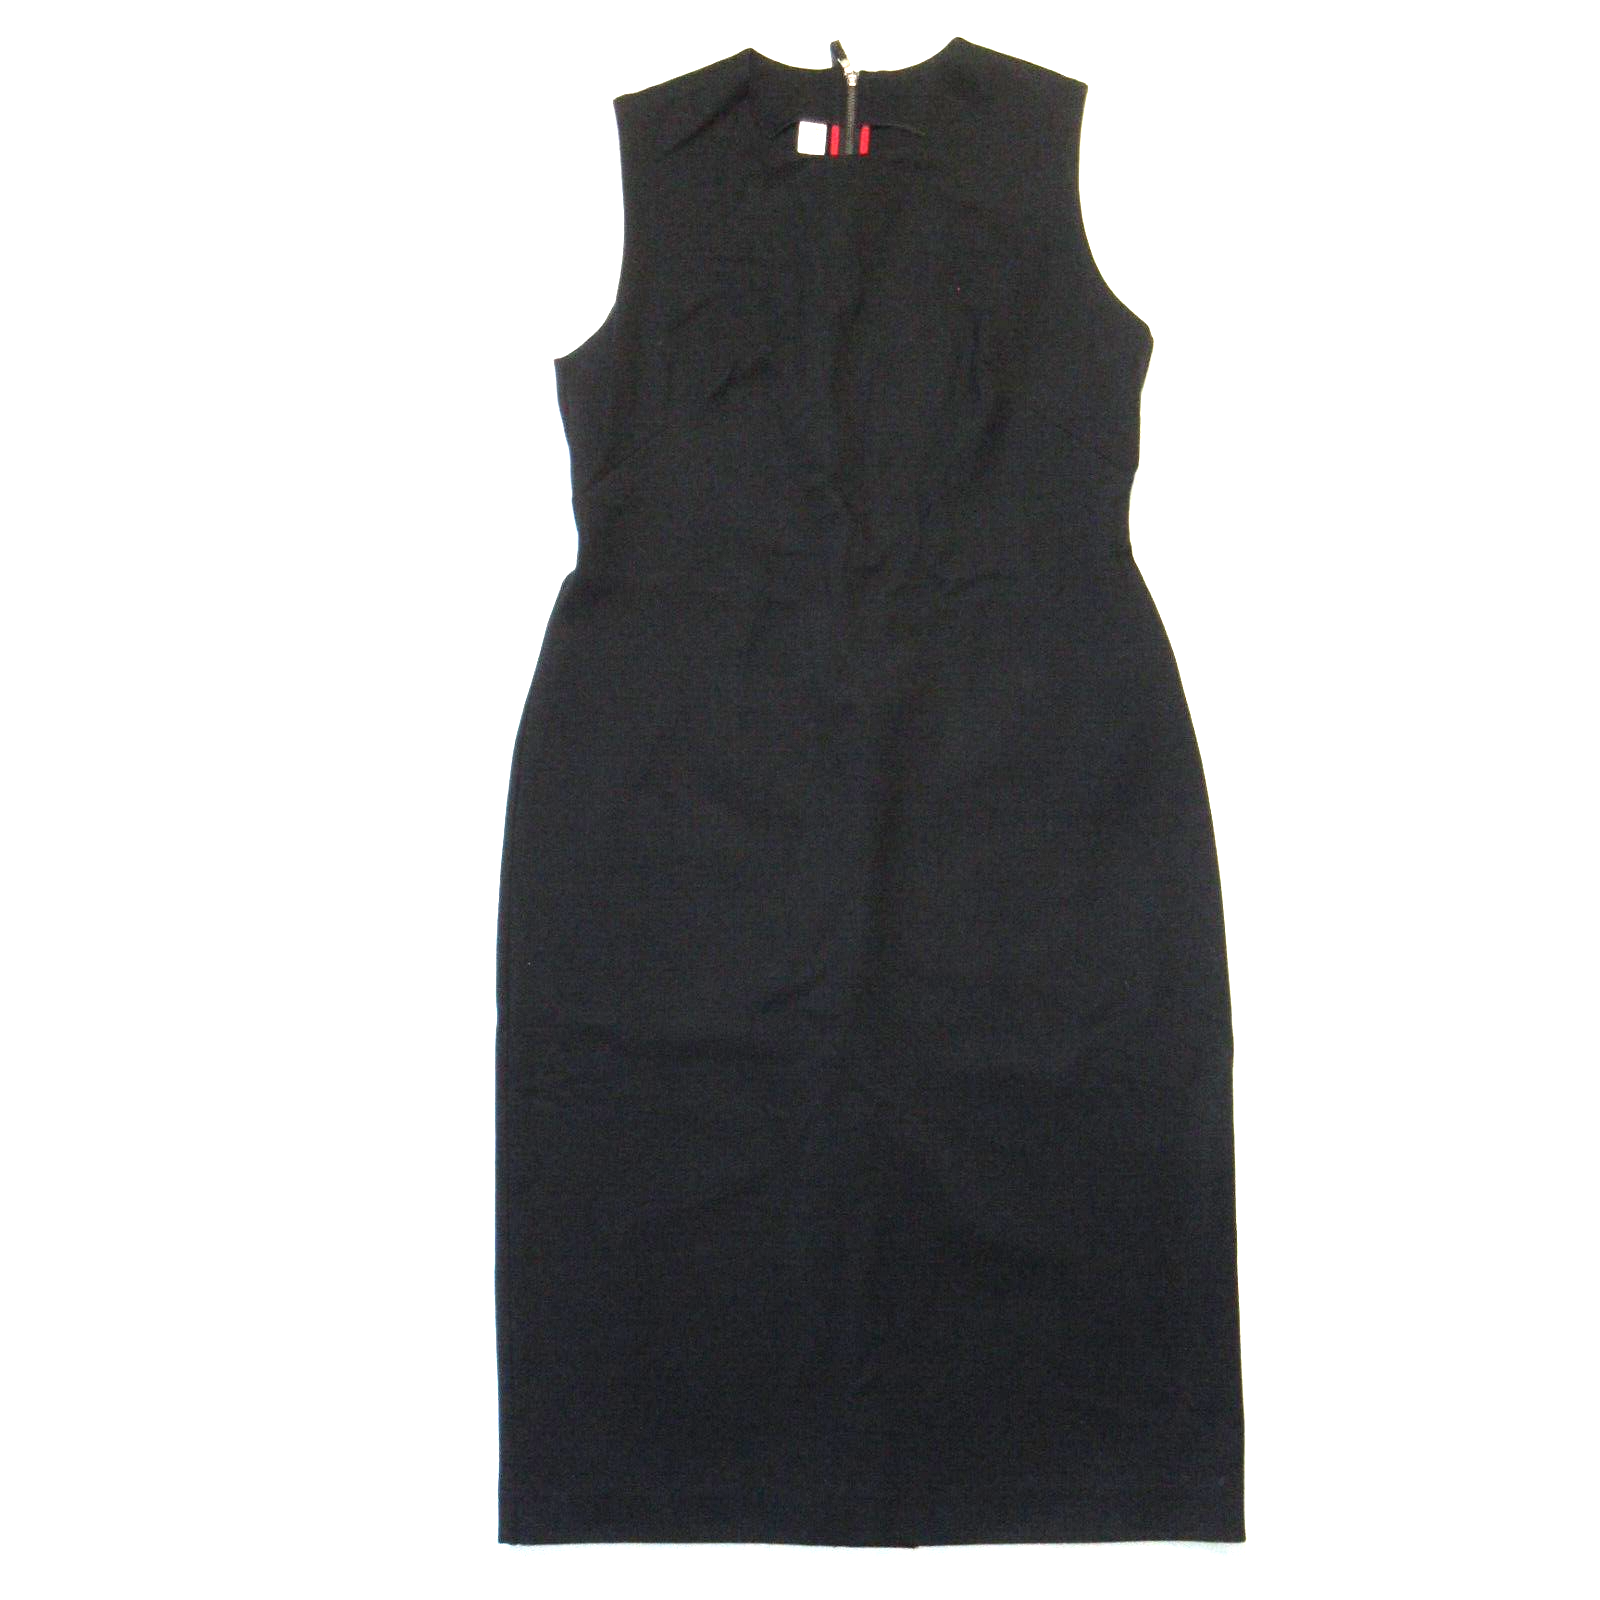 Primary image for NWT Spanx 20380R The Perfect Sheath in Classic Black Ponte Sleeveless Dress 1X